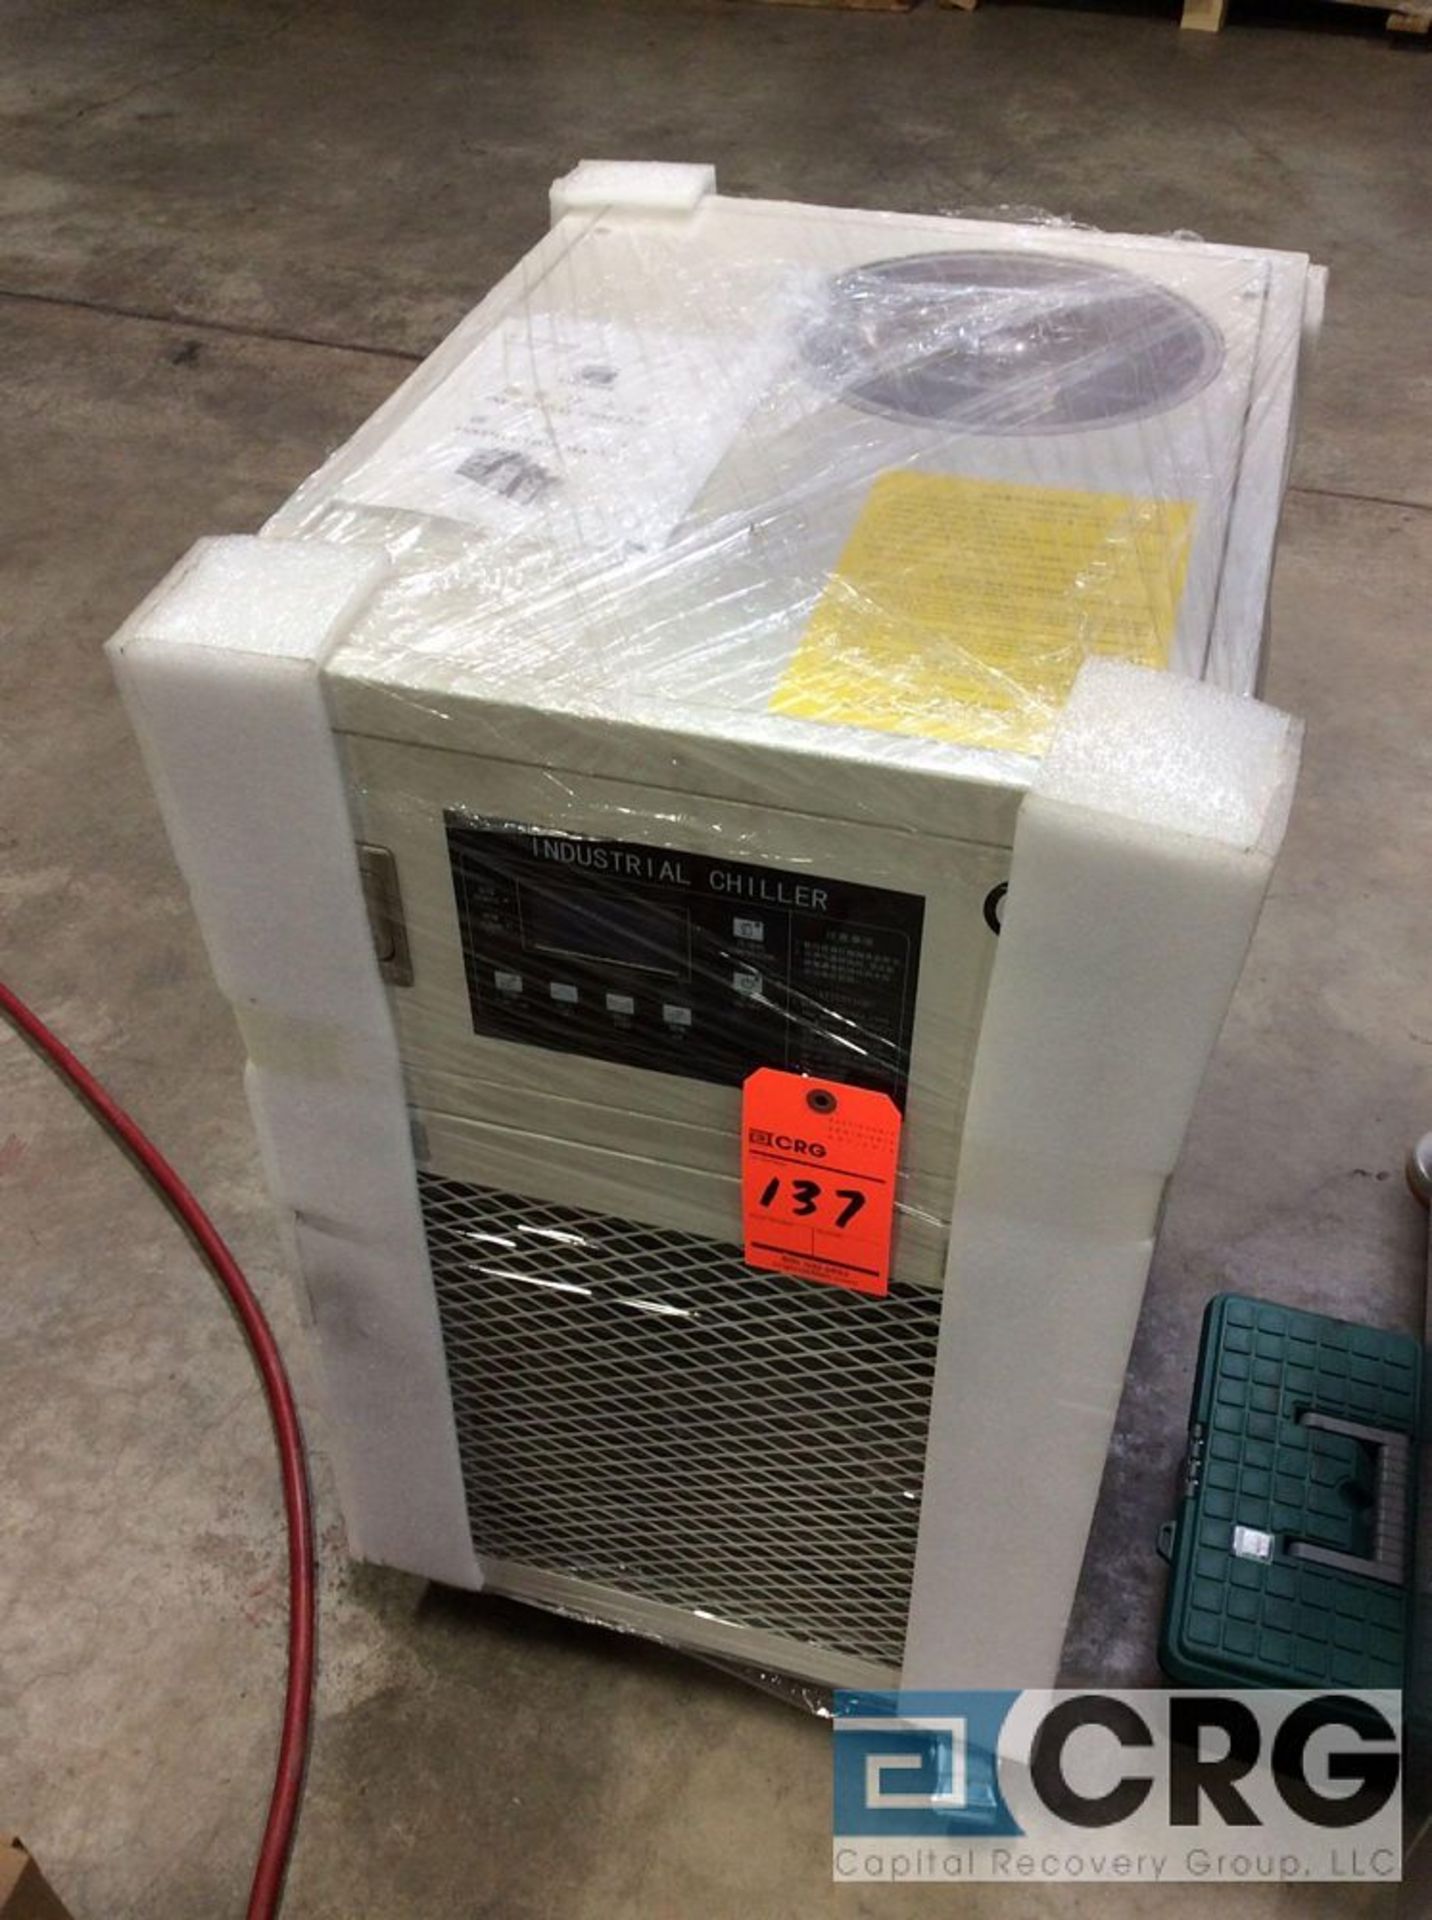 Portable industrial chiller with digital controls (NEW AND IN PACKAGING), subject to entirety bid